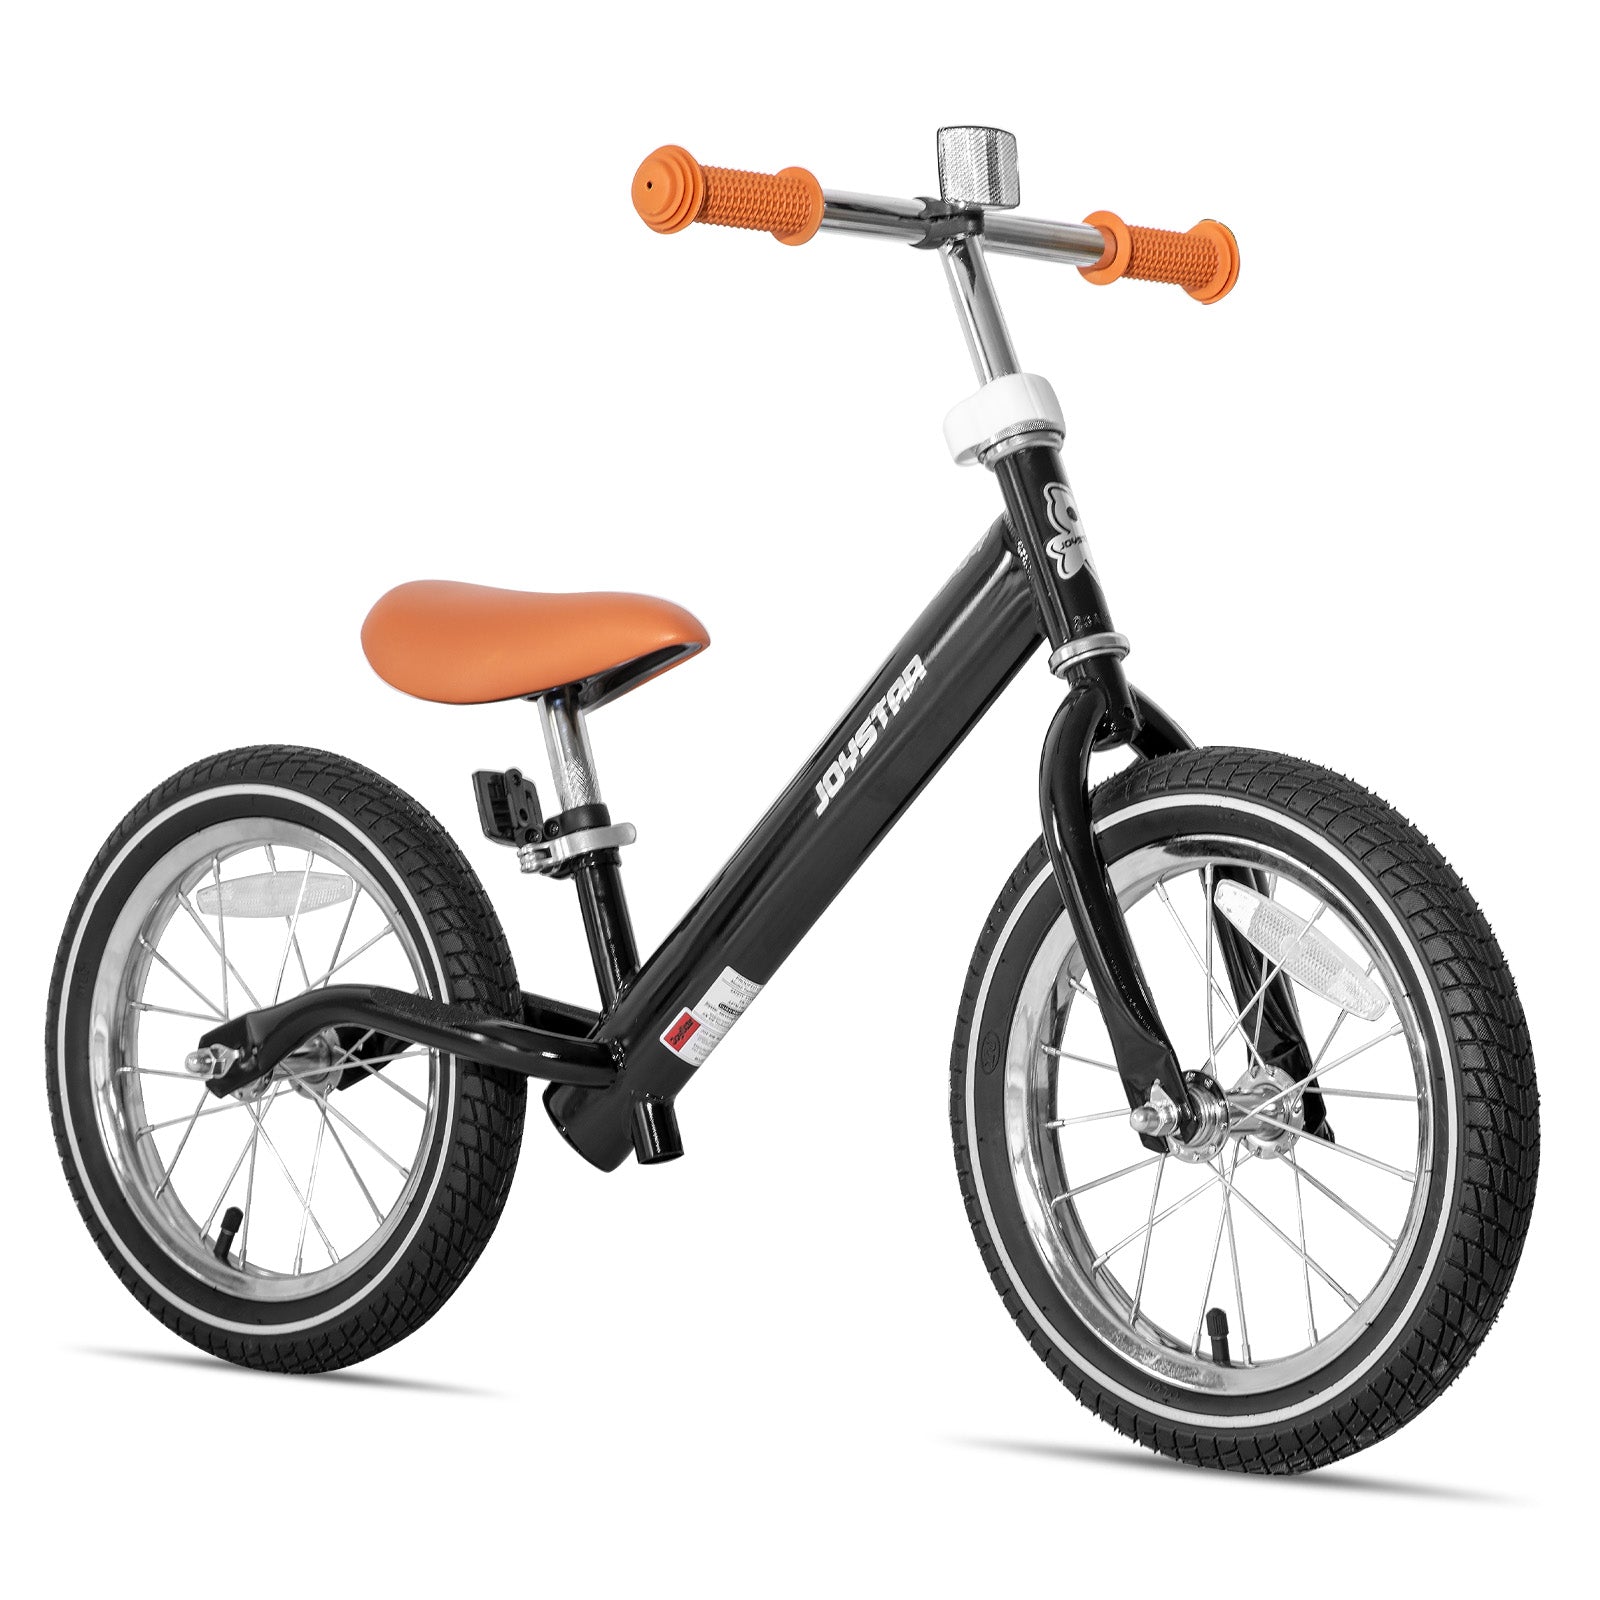 JOYSTAR 14/16 Inch Balance Bike for Toddlers and Kids Ages 3-8 Years Old  Boys and Girls - Sport Kids Balance Bike with Handbrake - No Pedal Training